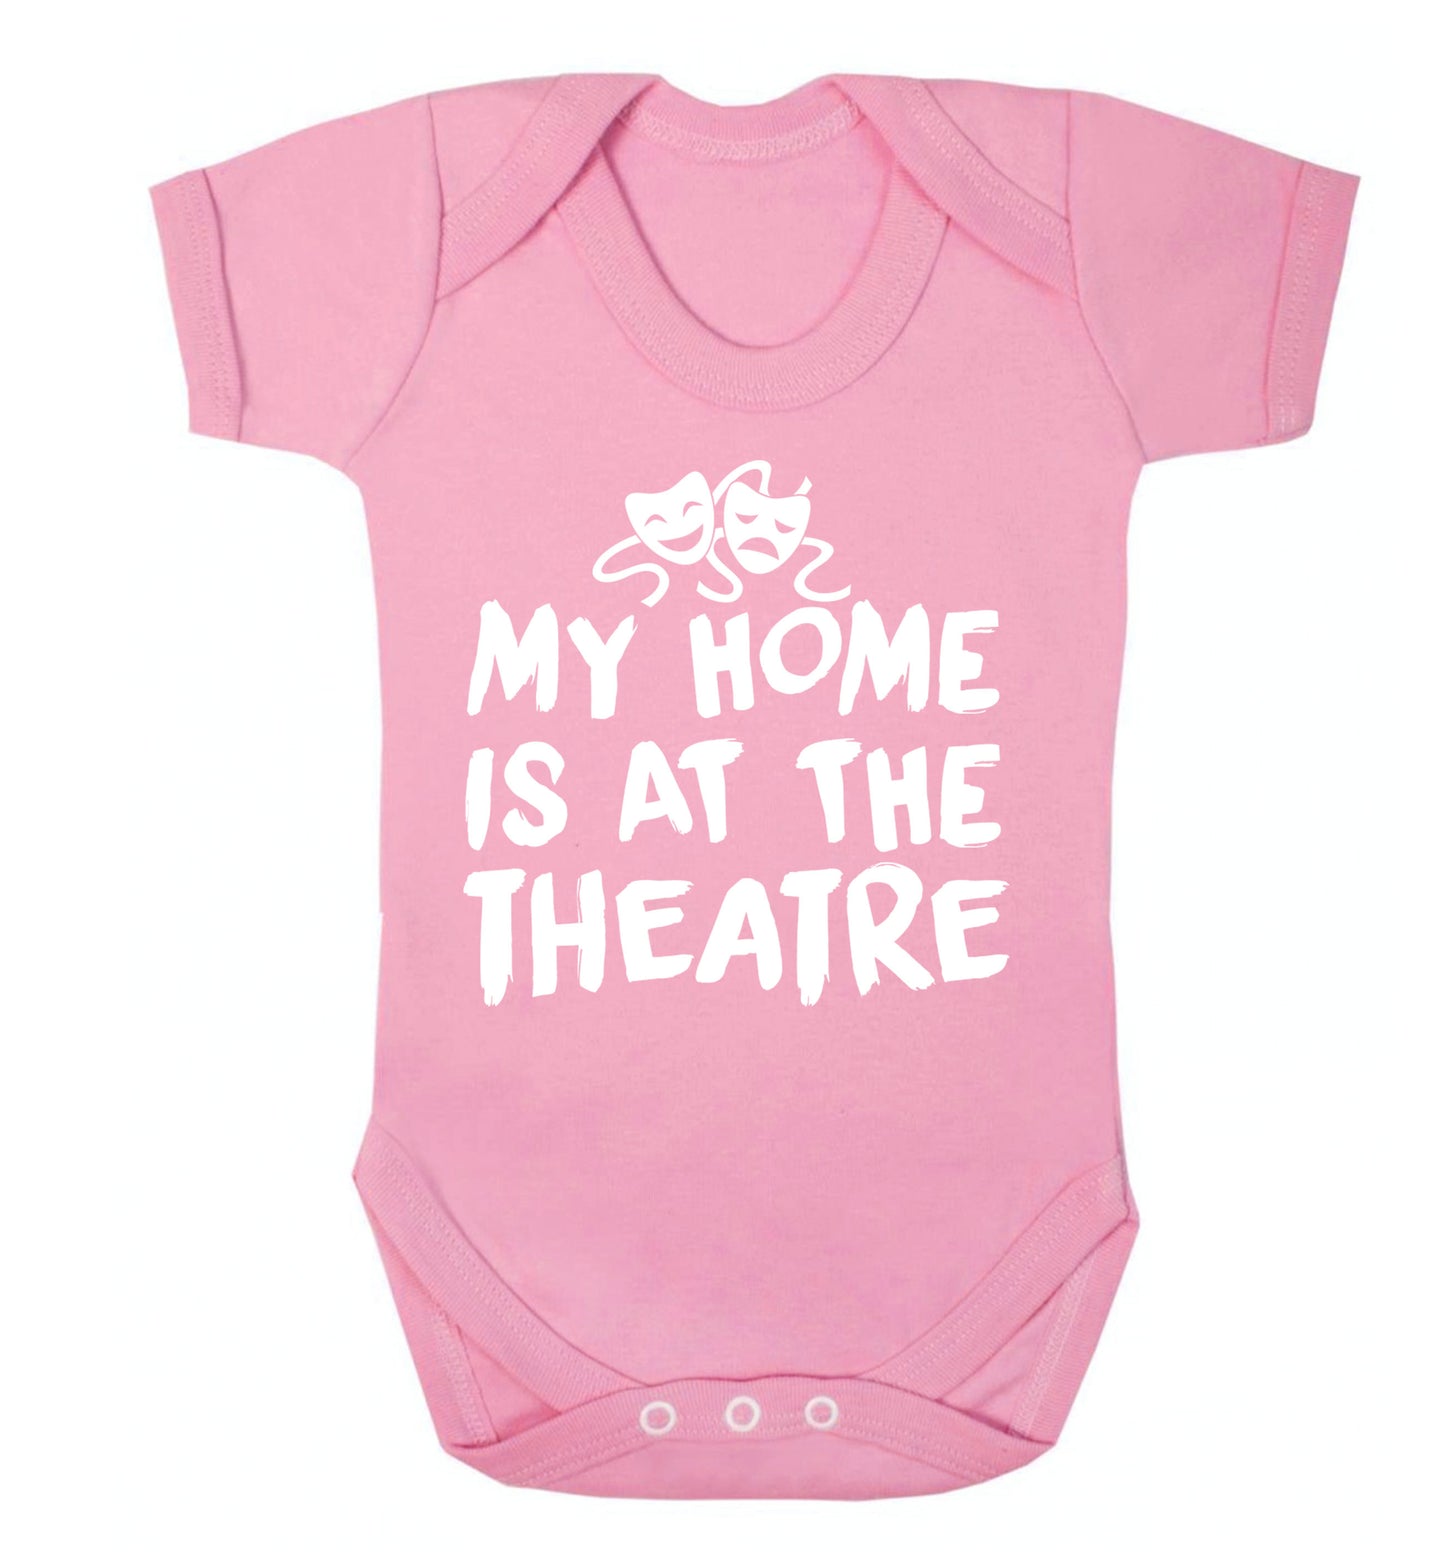 My home is at the theatre Baby Vest pale pink 18-24 months